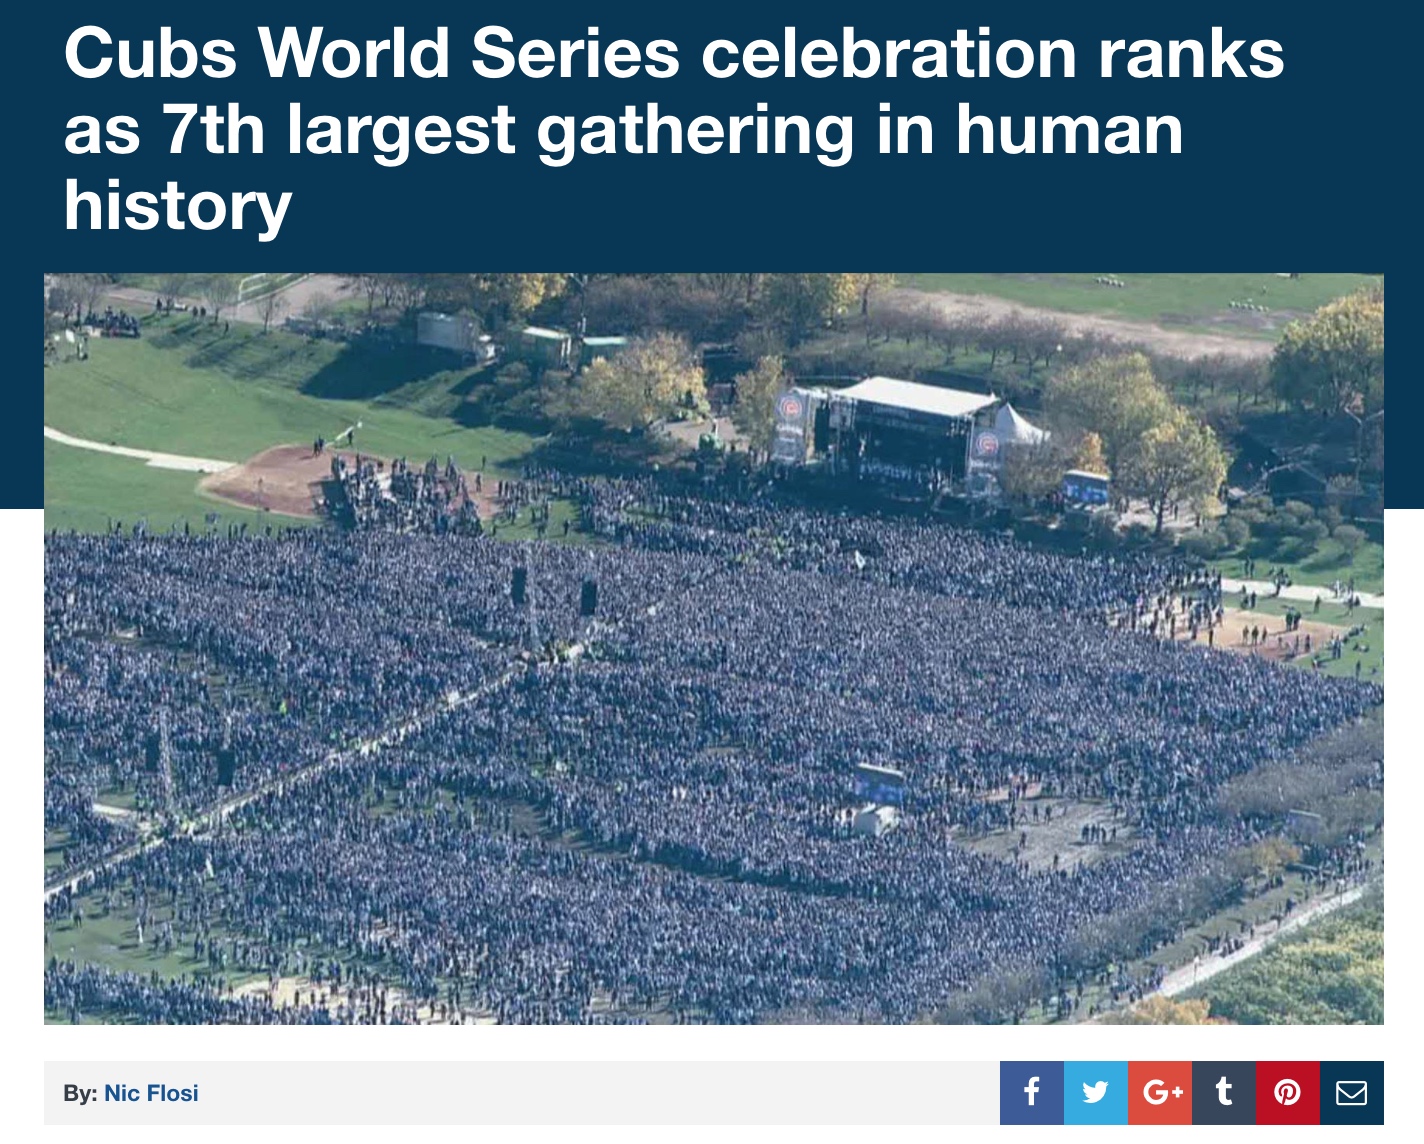 "cubs world series celebration ranks as 7th largest gathering in human history"